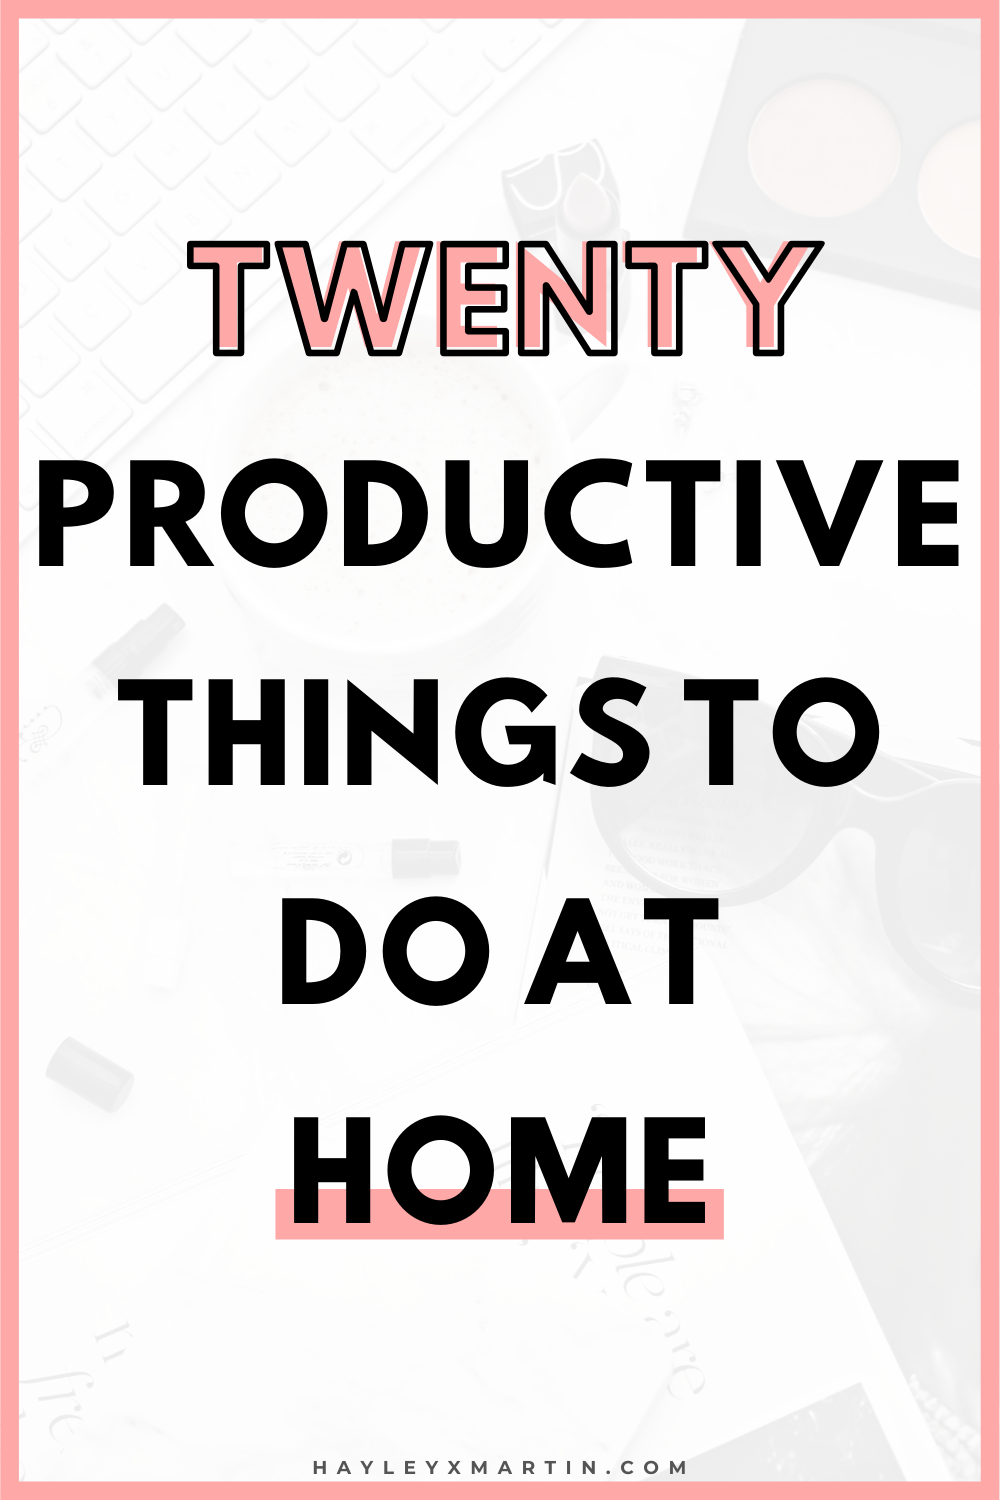 20 PRODUCTIVE THINGS TO DO AT HOME | HAYLEYXMARTIN